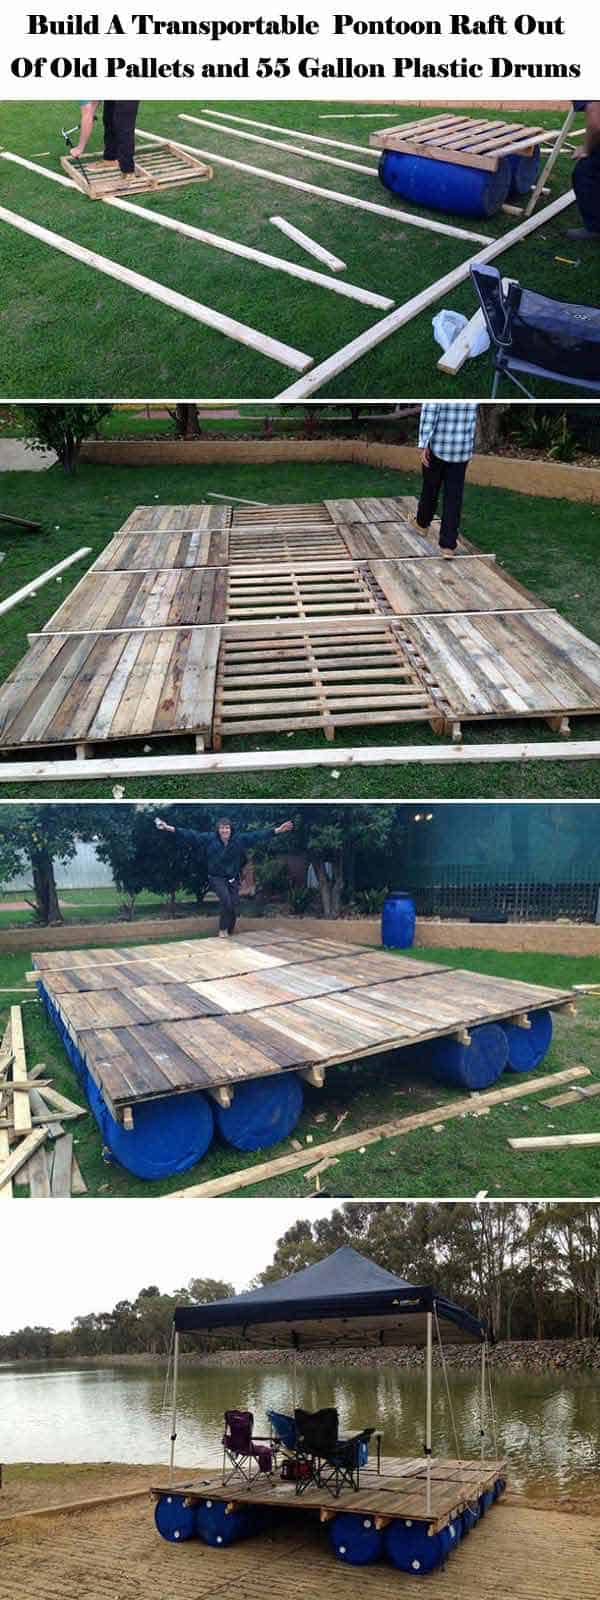 #6 BUILD FUN PONTOON RAFT WITH OLD PALLETS AND GALLON PLASTIC DRUMS